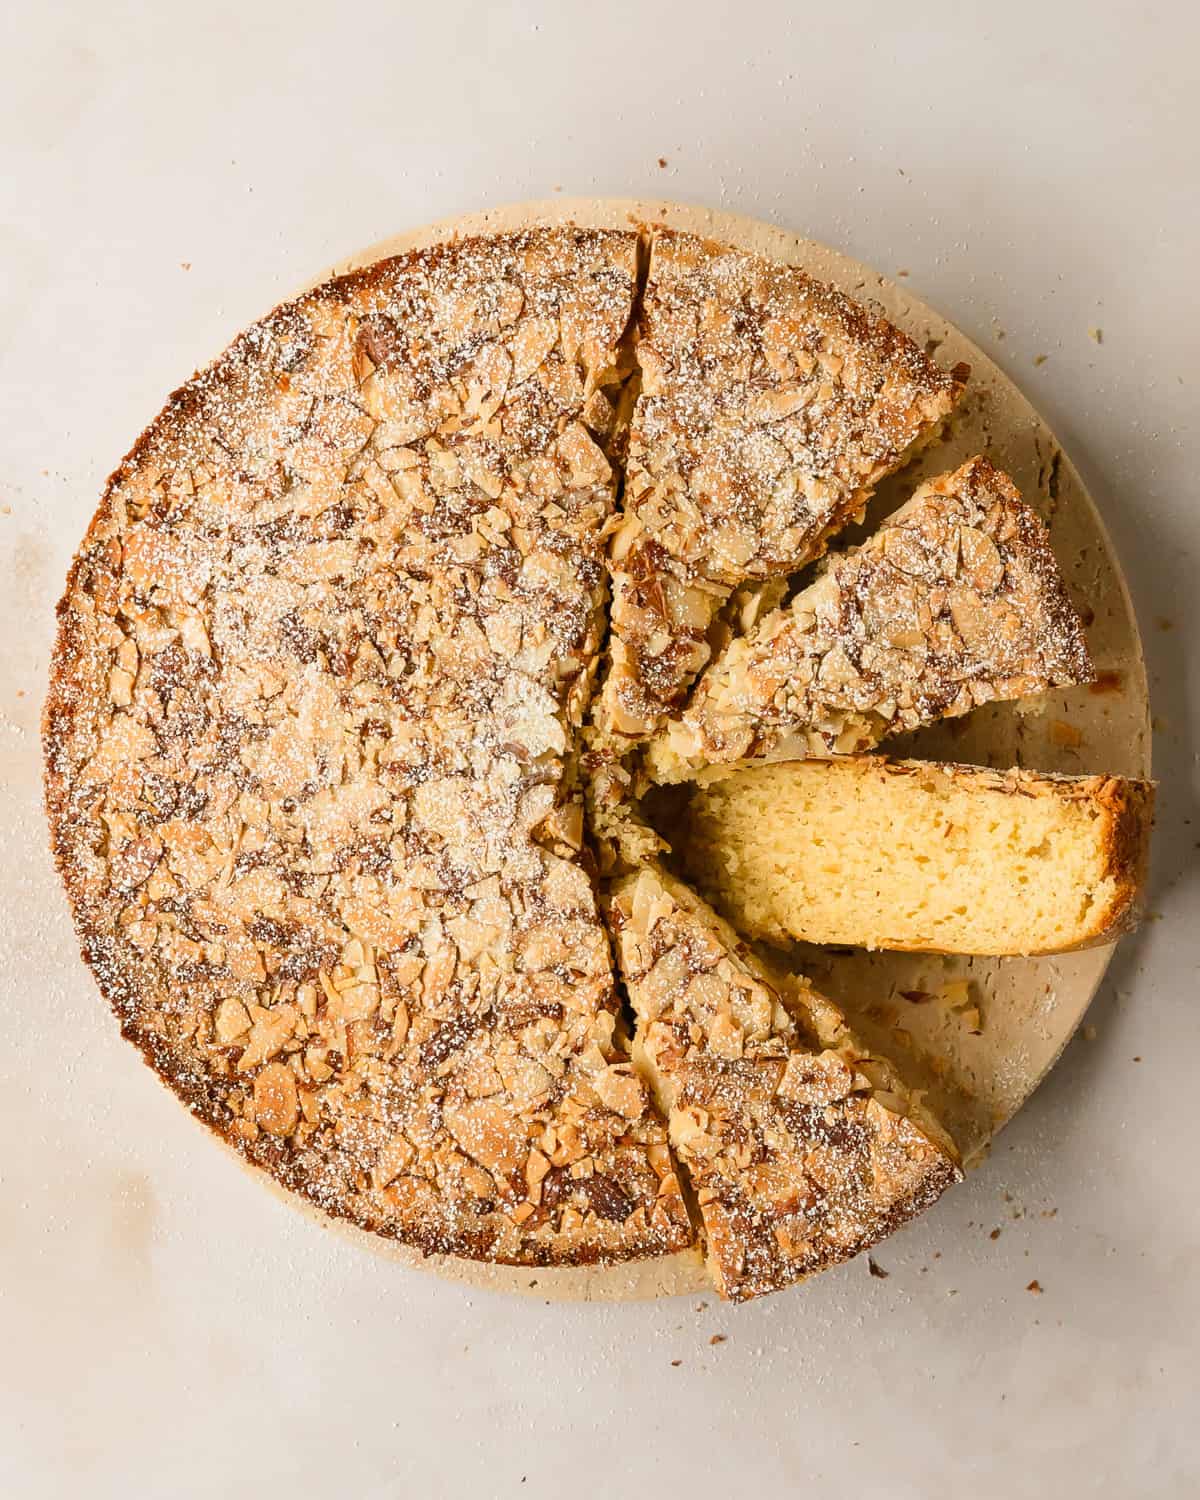 Cardamom cake is a traditional Swedish cardamom cake. This simple cardamom dessert has a buttery soft crumb and with a crunchy almond topping. Make this wonderfully easy cardamom cake recipe to pair with coffee or tea for your afternoon fika. 